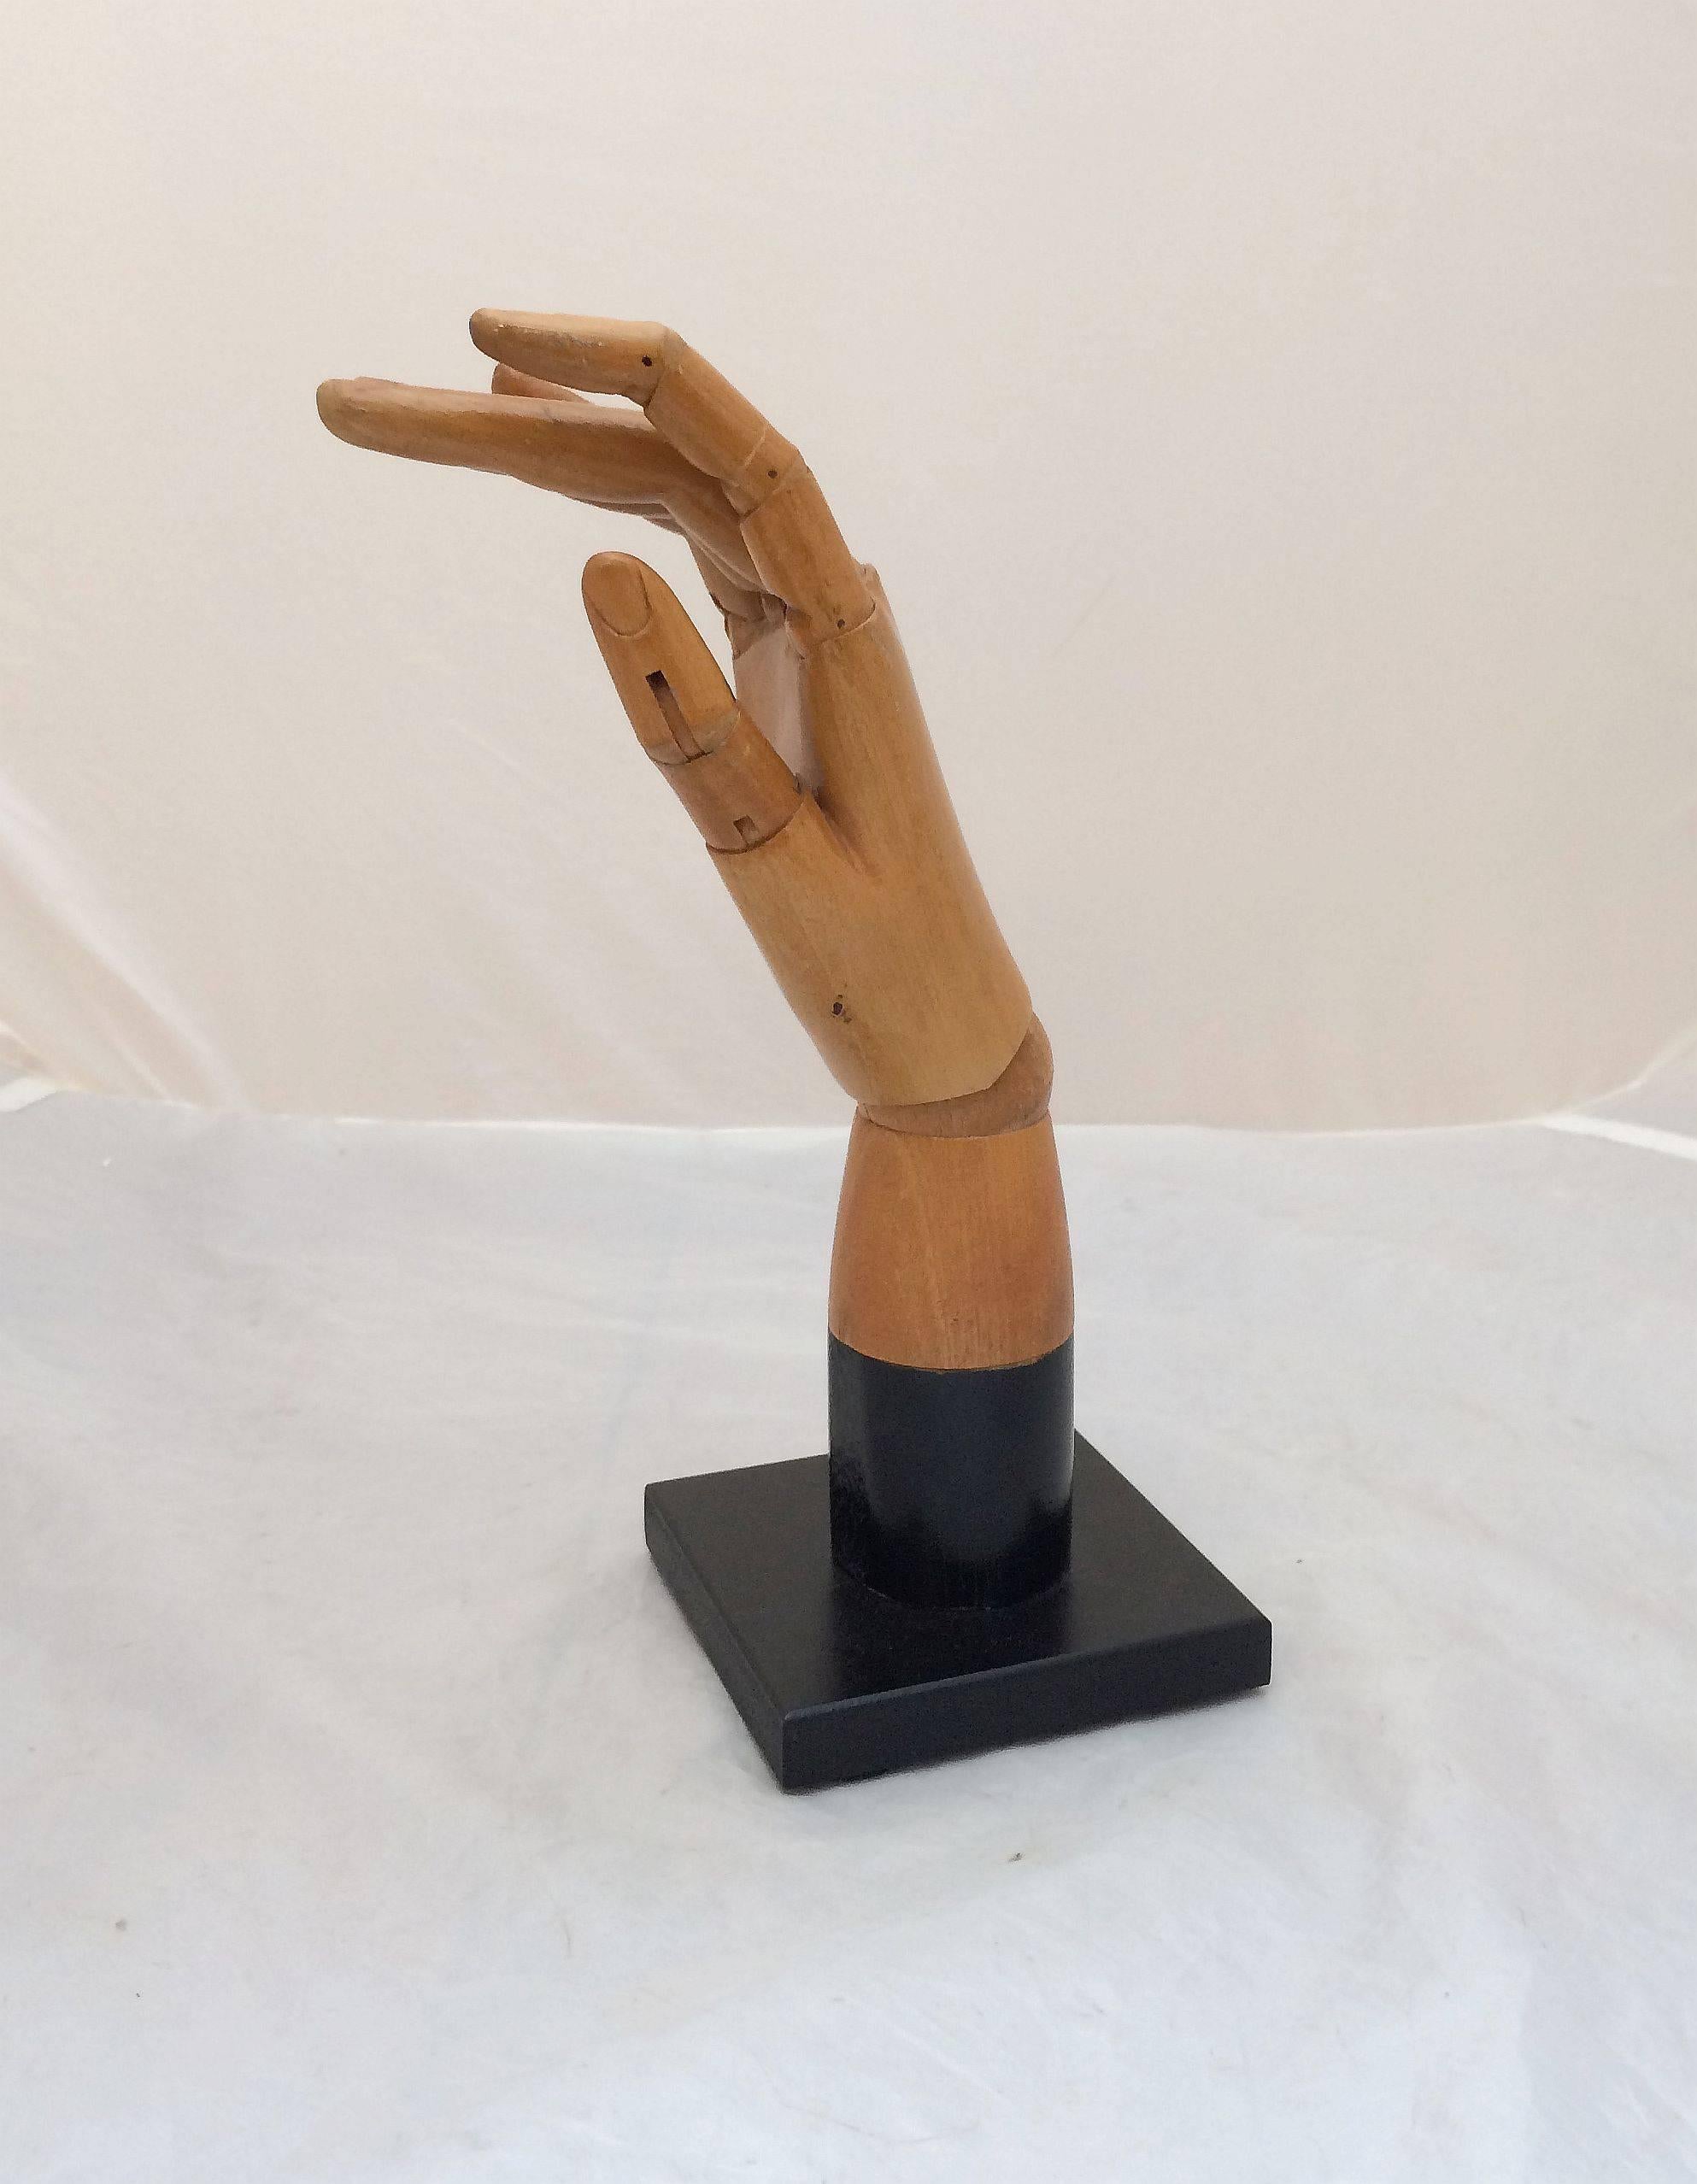 Metal Articulated Model of Hand from England